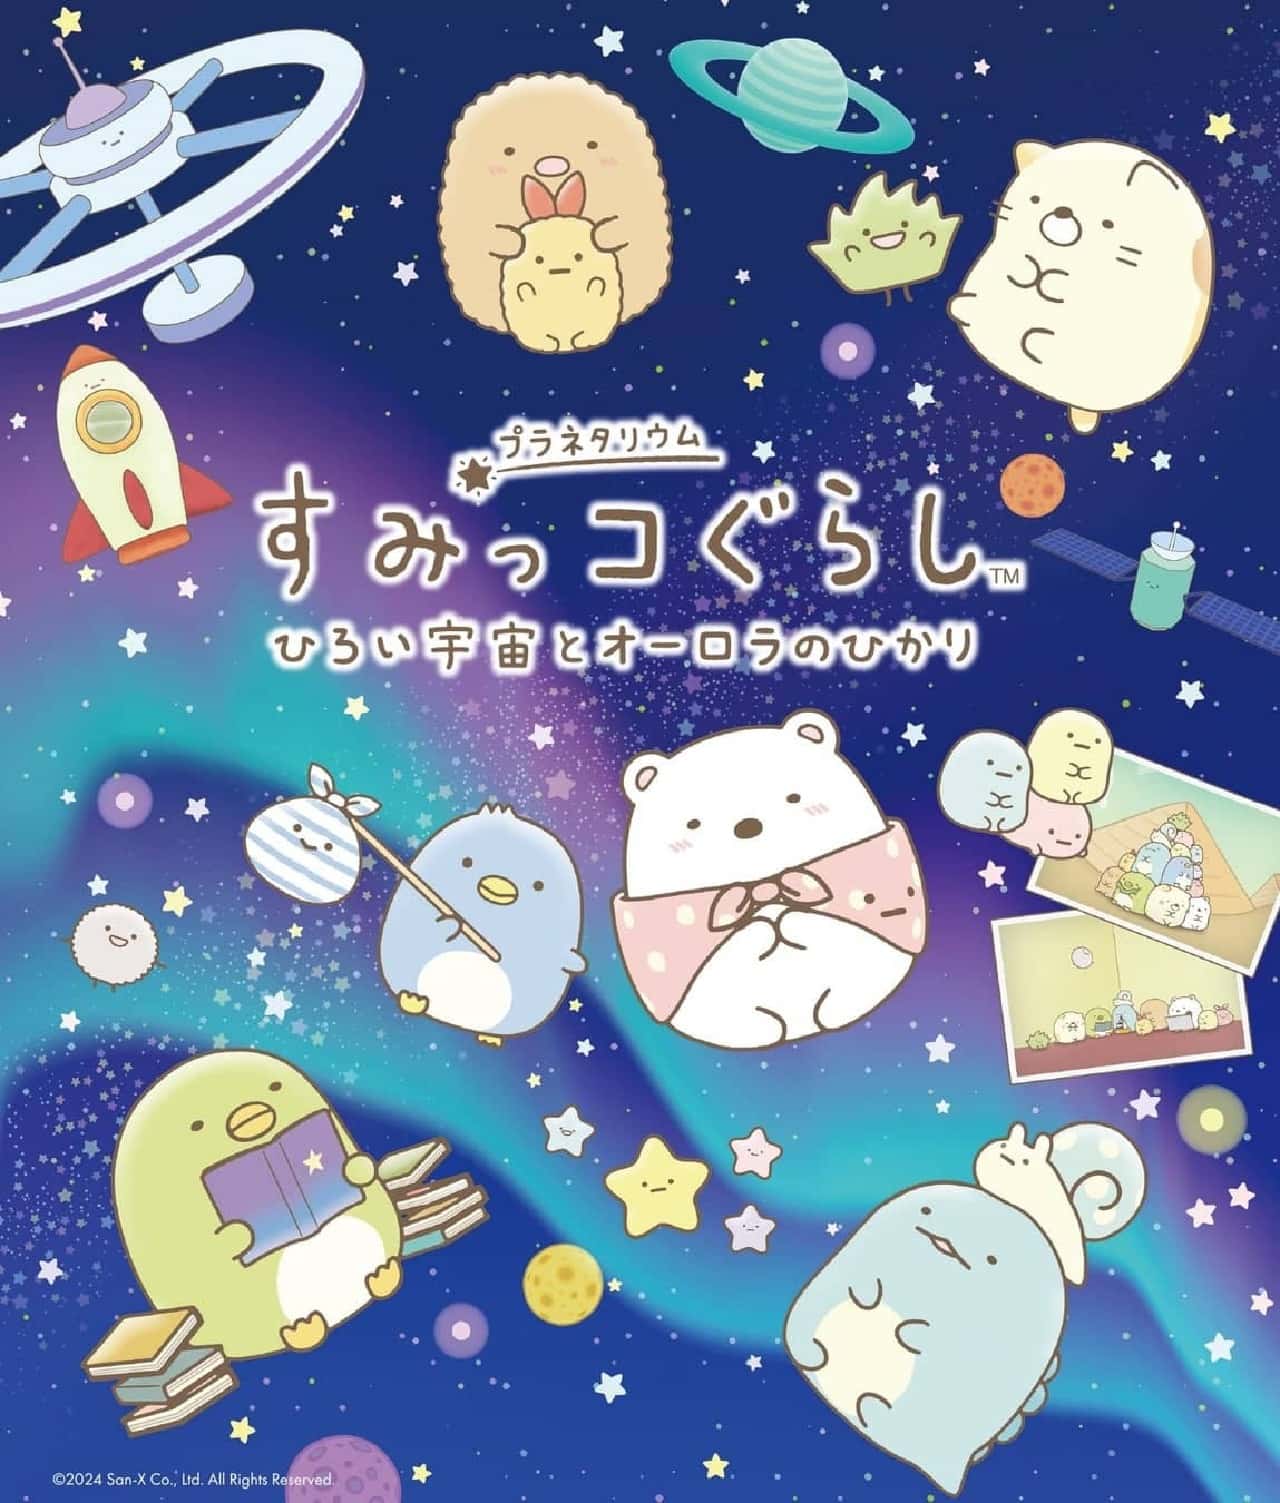 San-X's planetarium projection of "Sumikko Gurashi: The Broad Universe and the Light of the Aurora" will be released in March at science museums and planetariums nationwide! Image 1